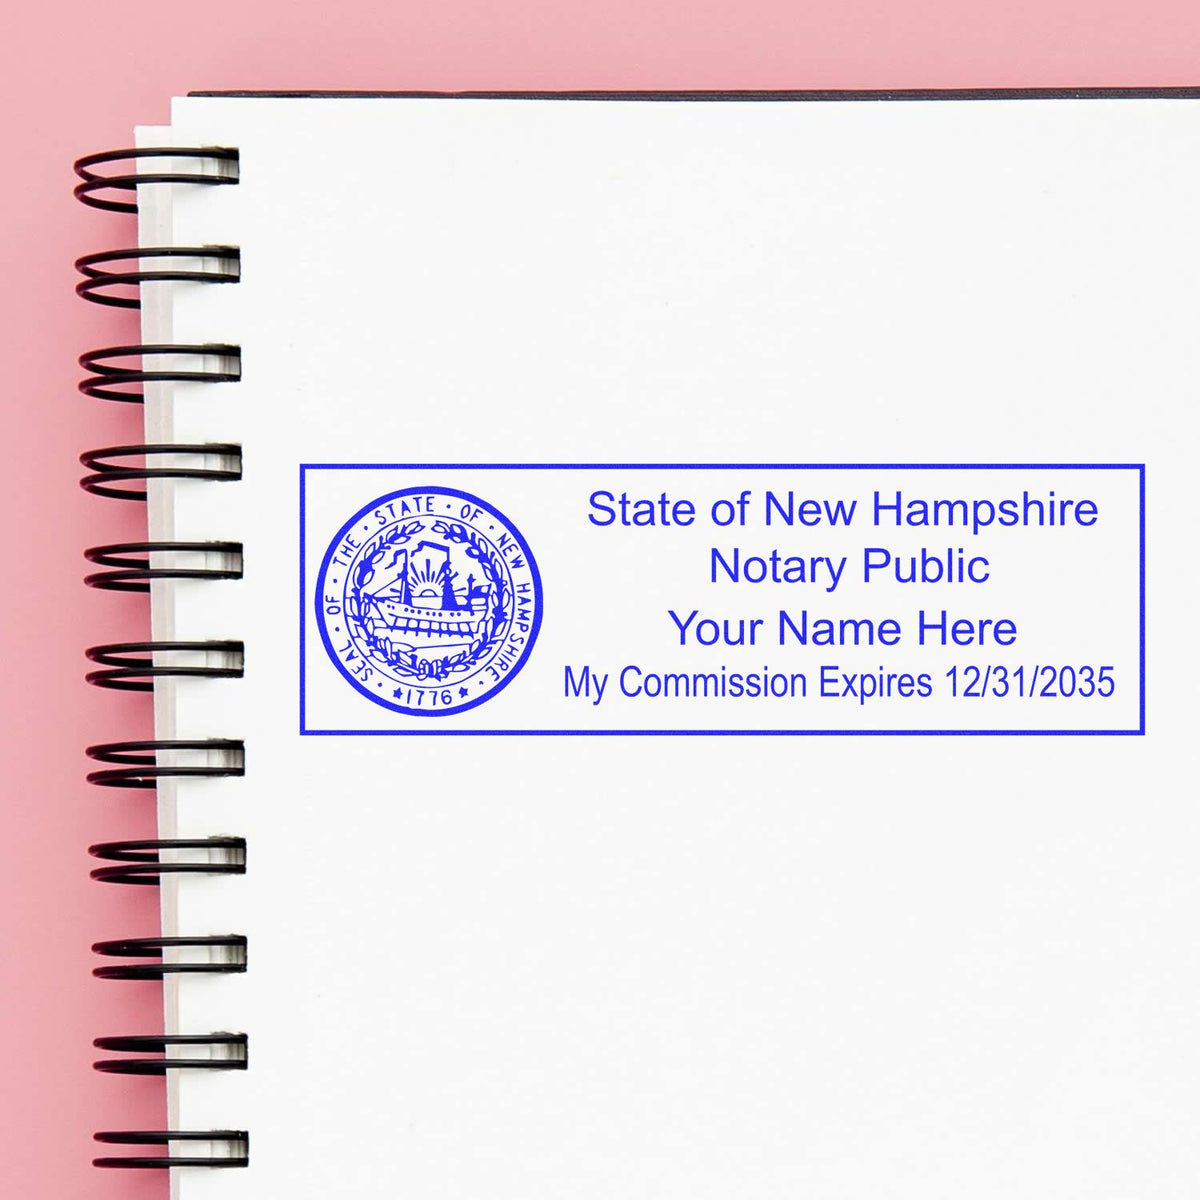 A photograph of the Heavy-Duty New Hampshire Rectangular Notary Stamp stamp impression reveals a vivid, professional image of the on paper.